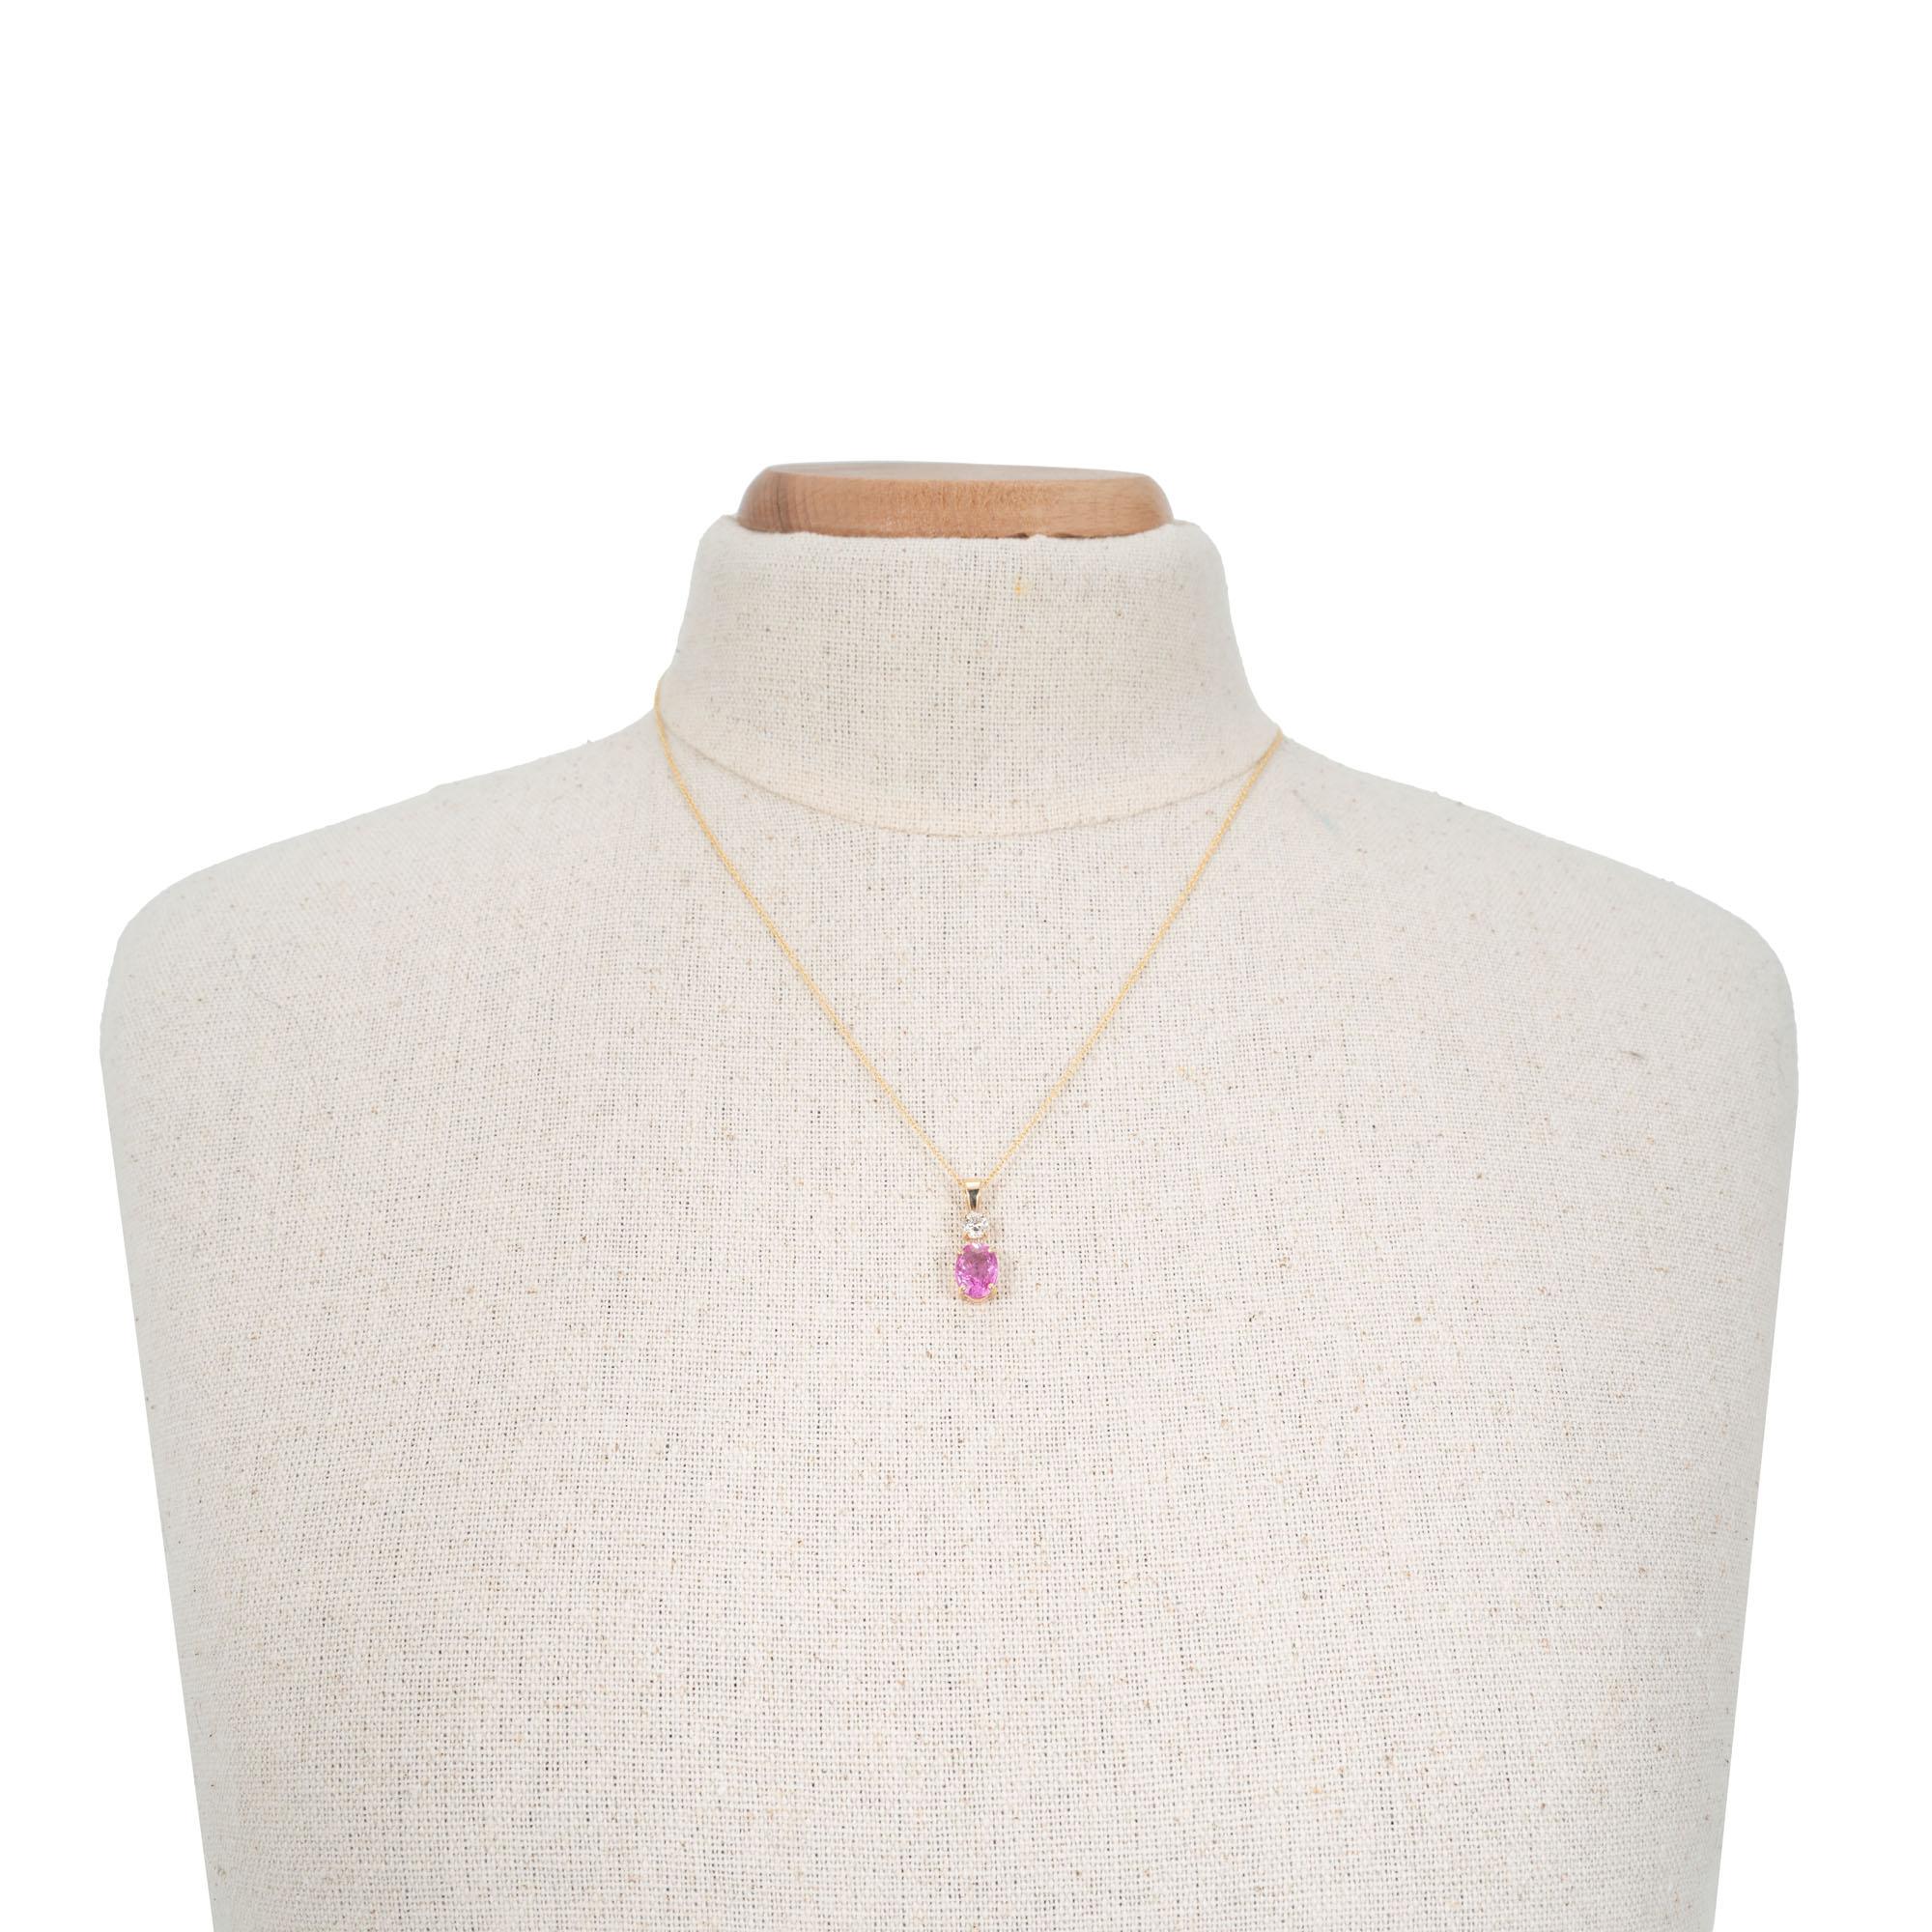 Oval Cut Peter Suchy GIA Certified 2.02 Carat Pink Sapphire Diamond Gold Pendant Necklace